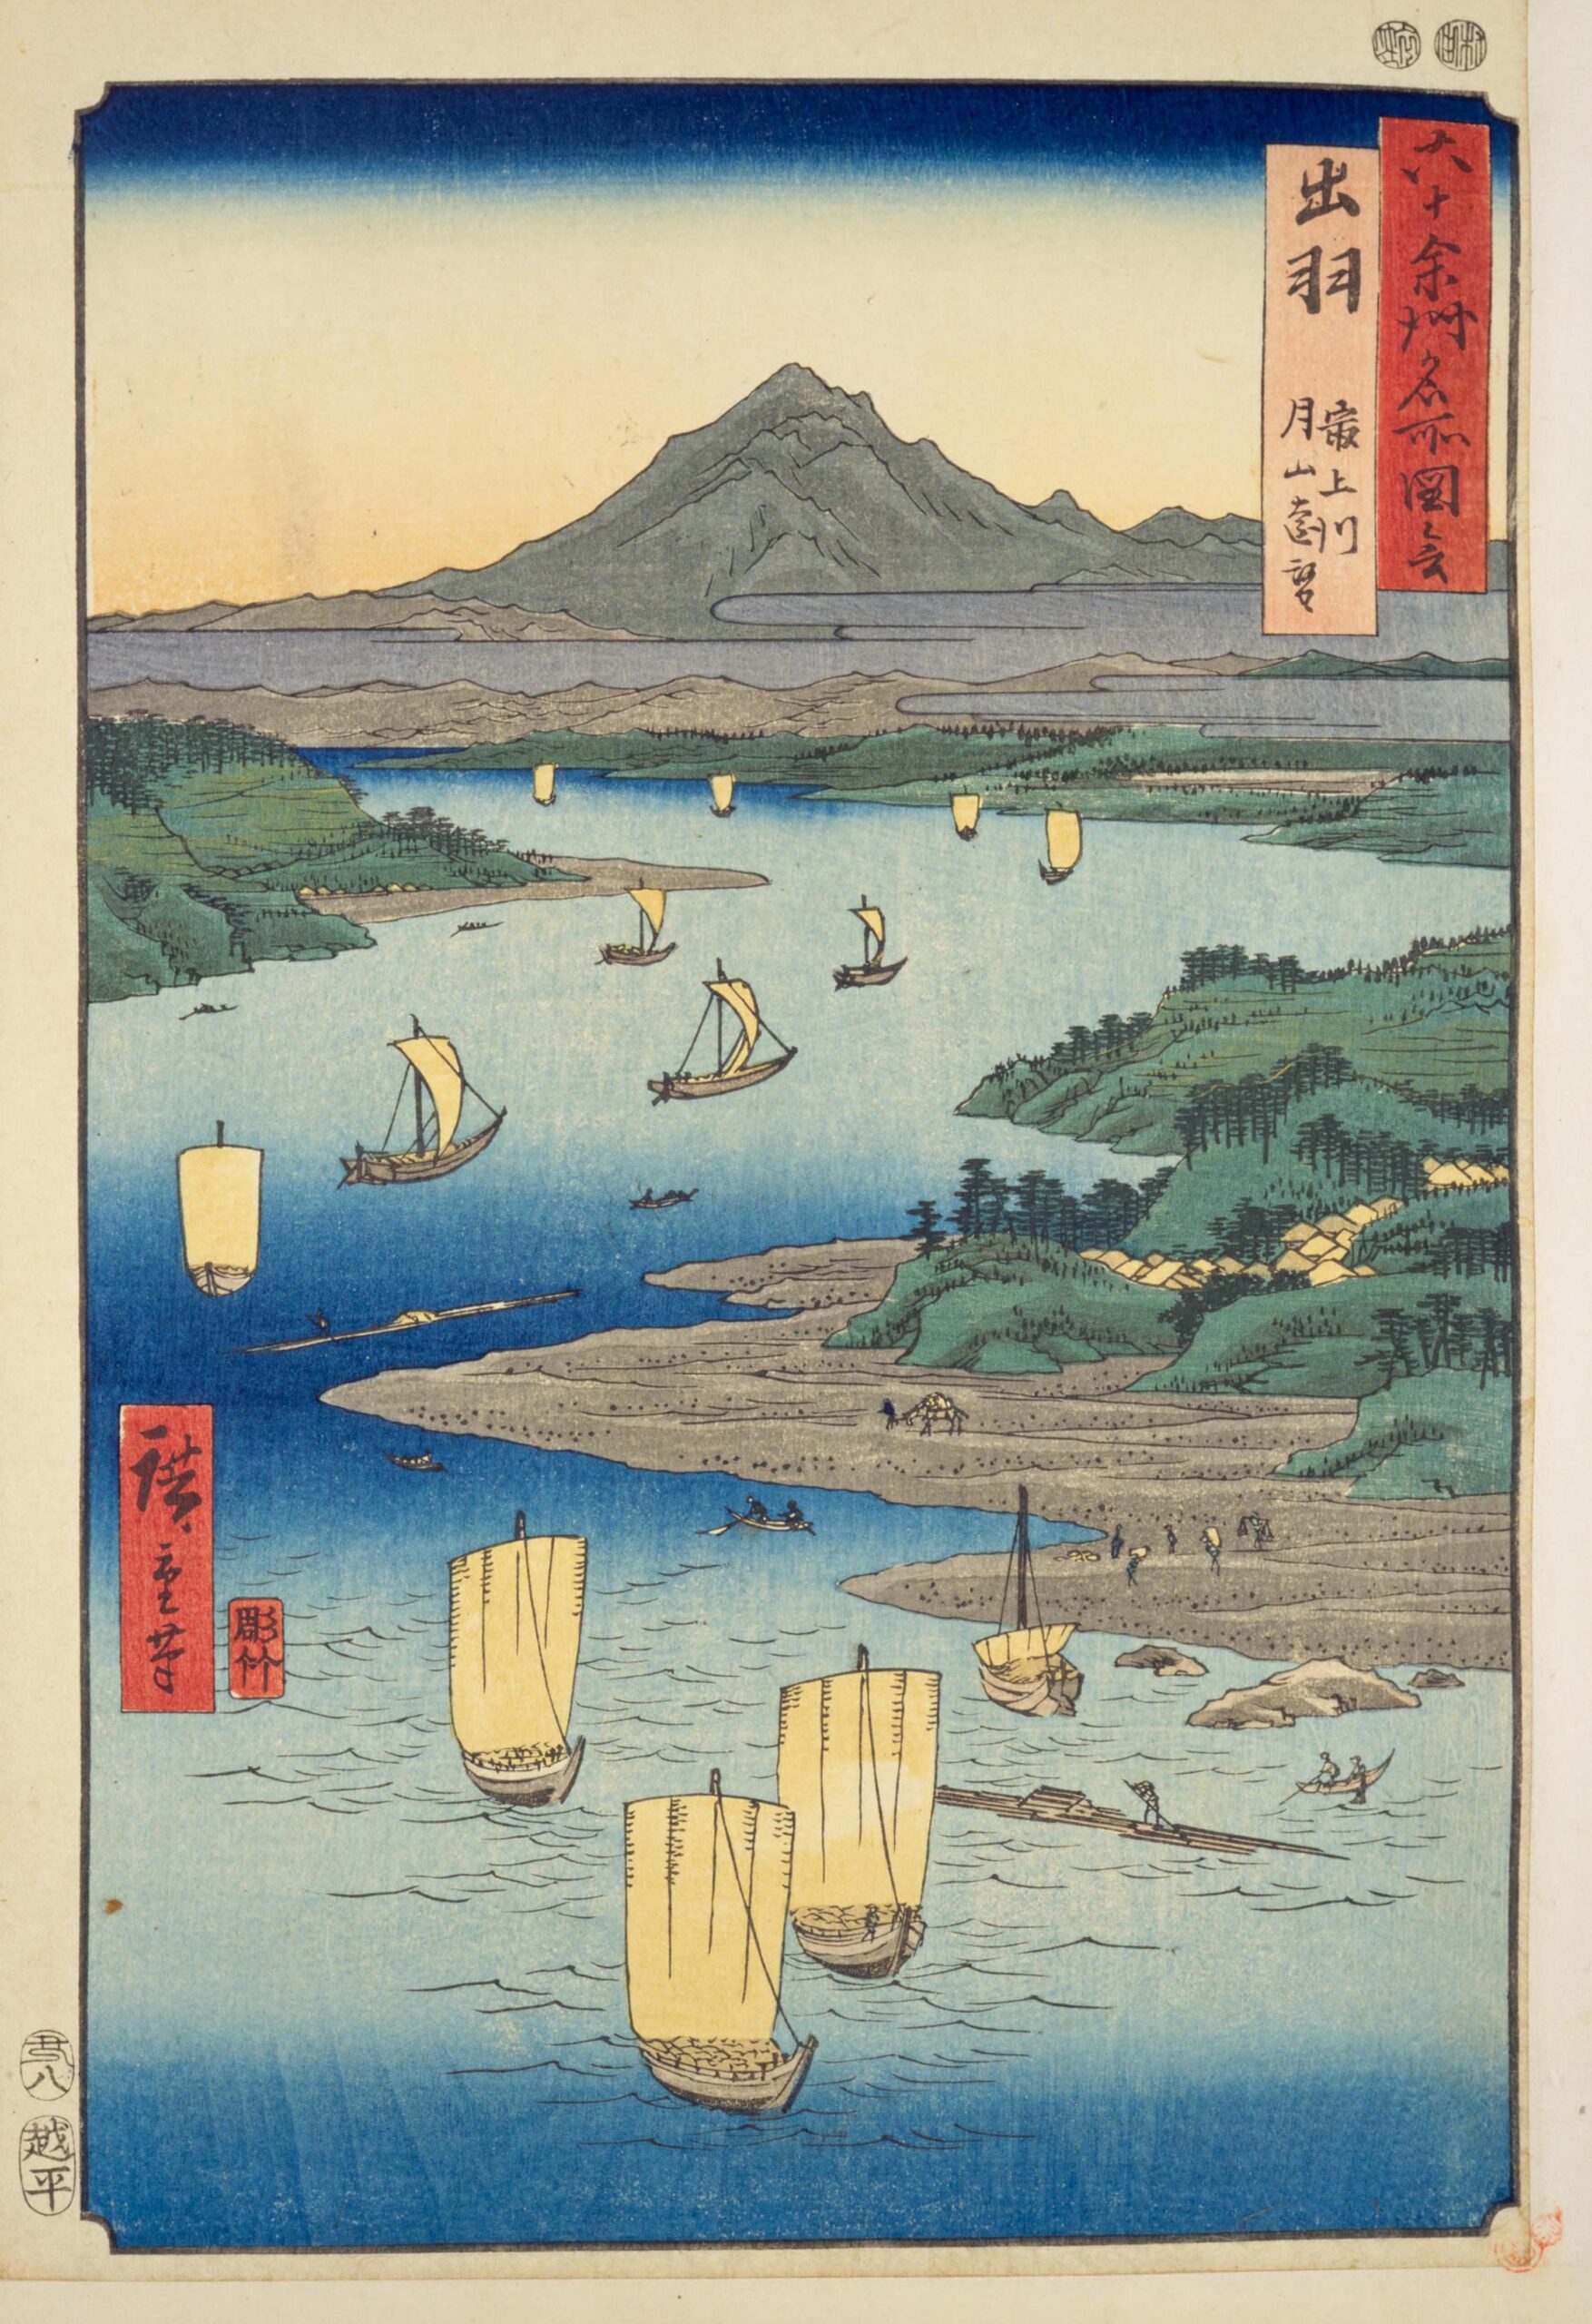 Hiroshiges - 29 Dewa Province: Mogami River, A Perspective View of Mount Gassan (Dewa, Mogamigawa, Gassan enbō) - Pictures of Famous Places in the Sixty-odd Provinces